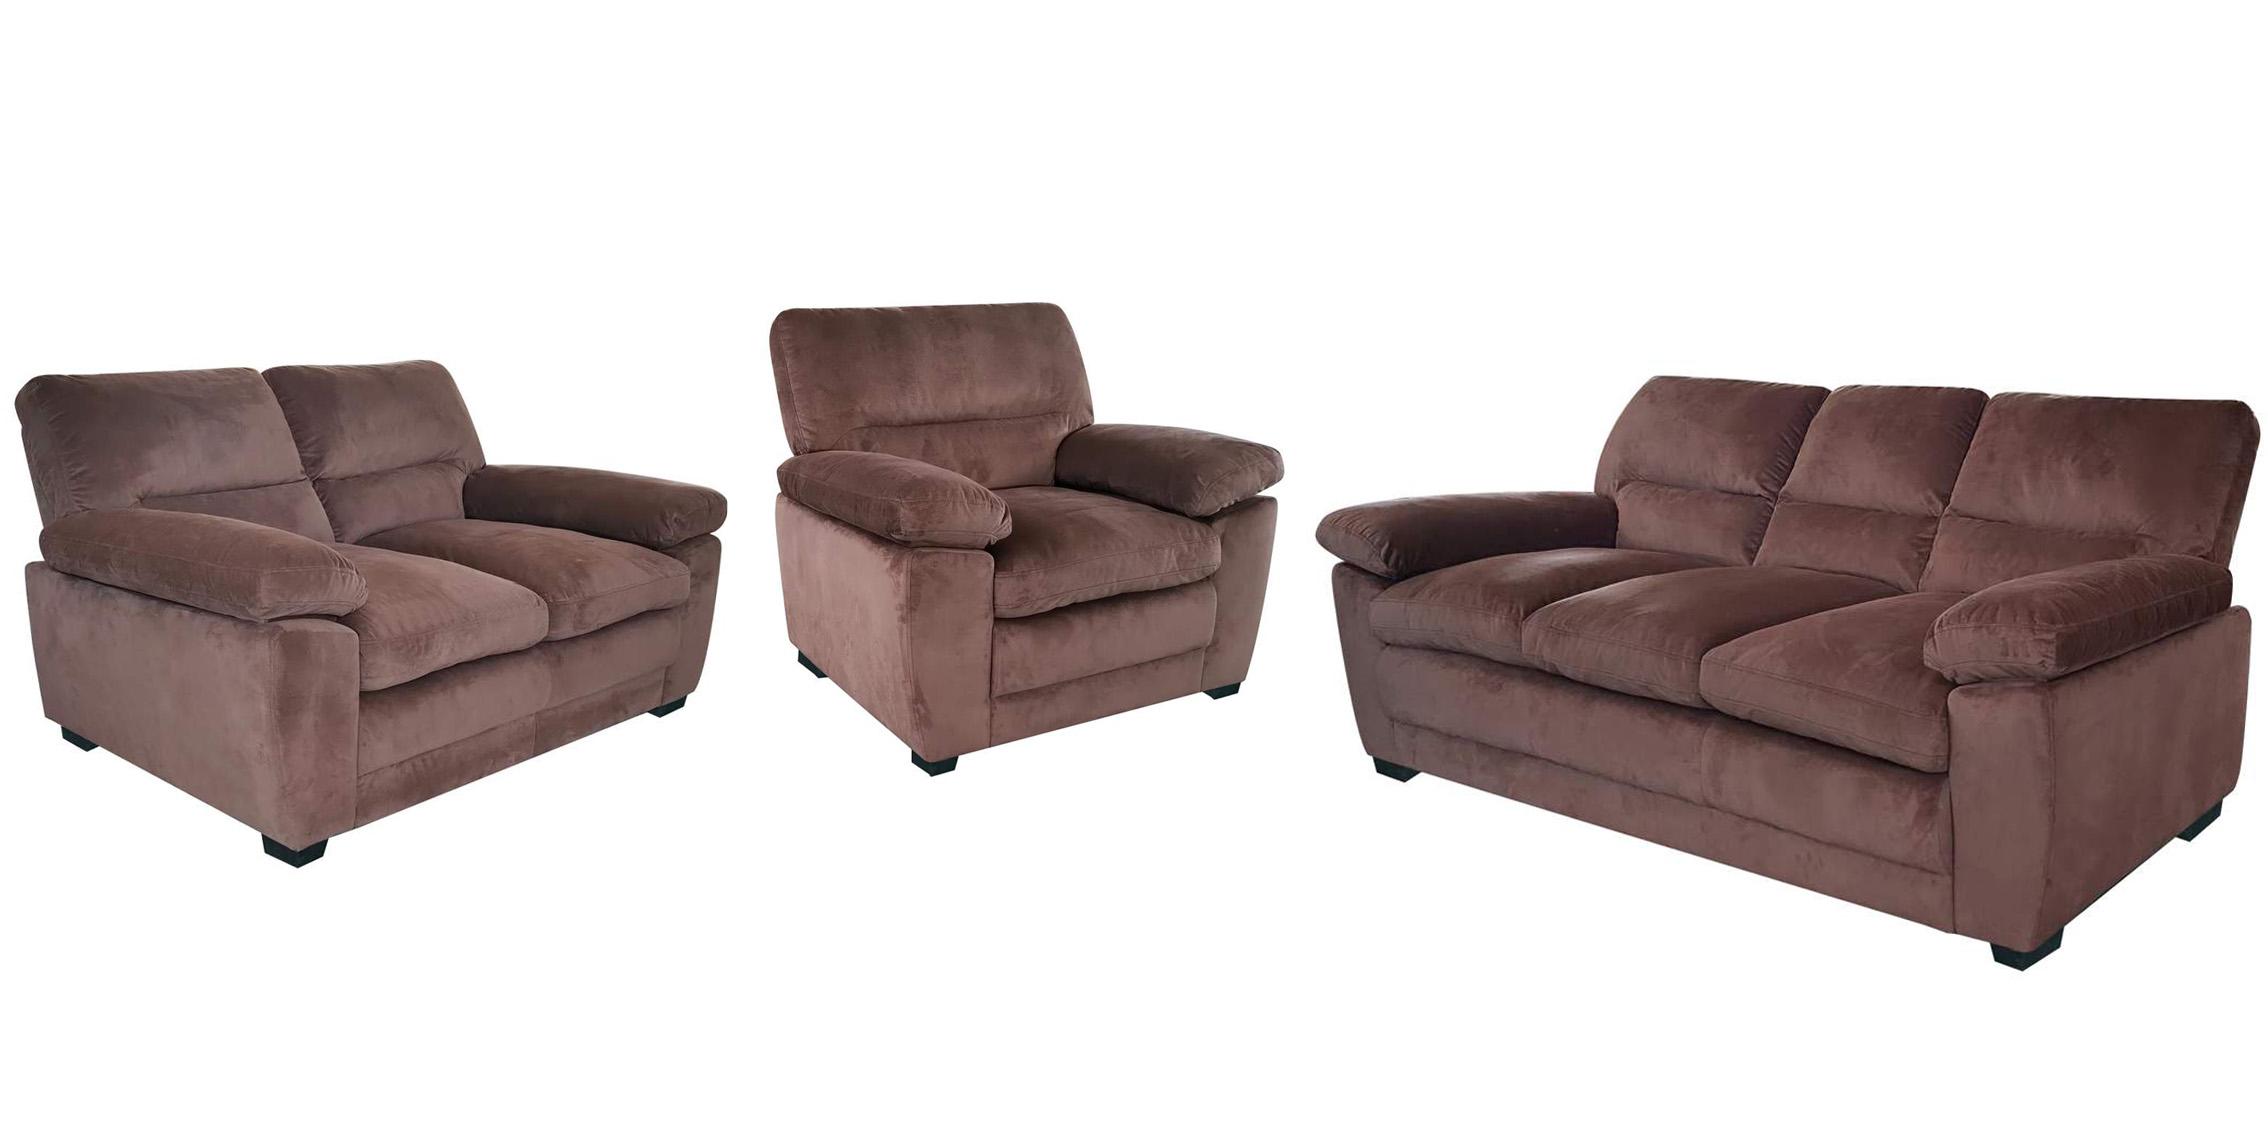 Contemporary, Modern Sofa Set MAXX GHF-808857612854-Set-3 in Brown Fabric